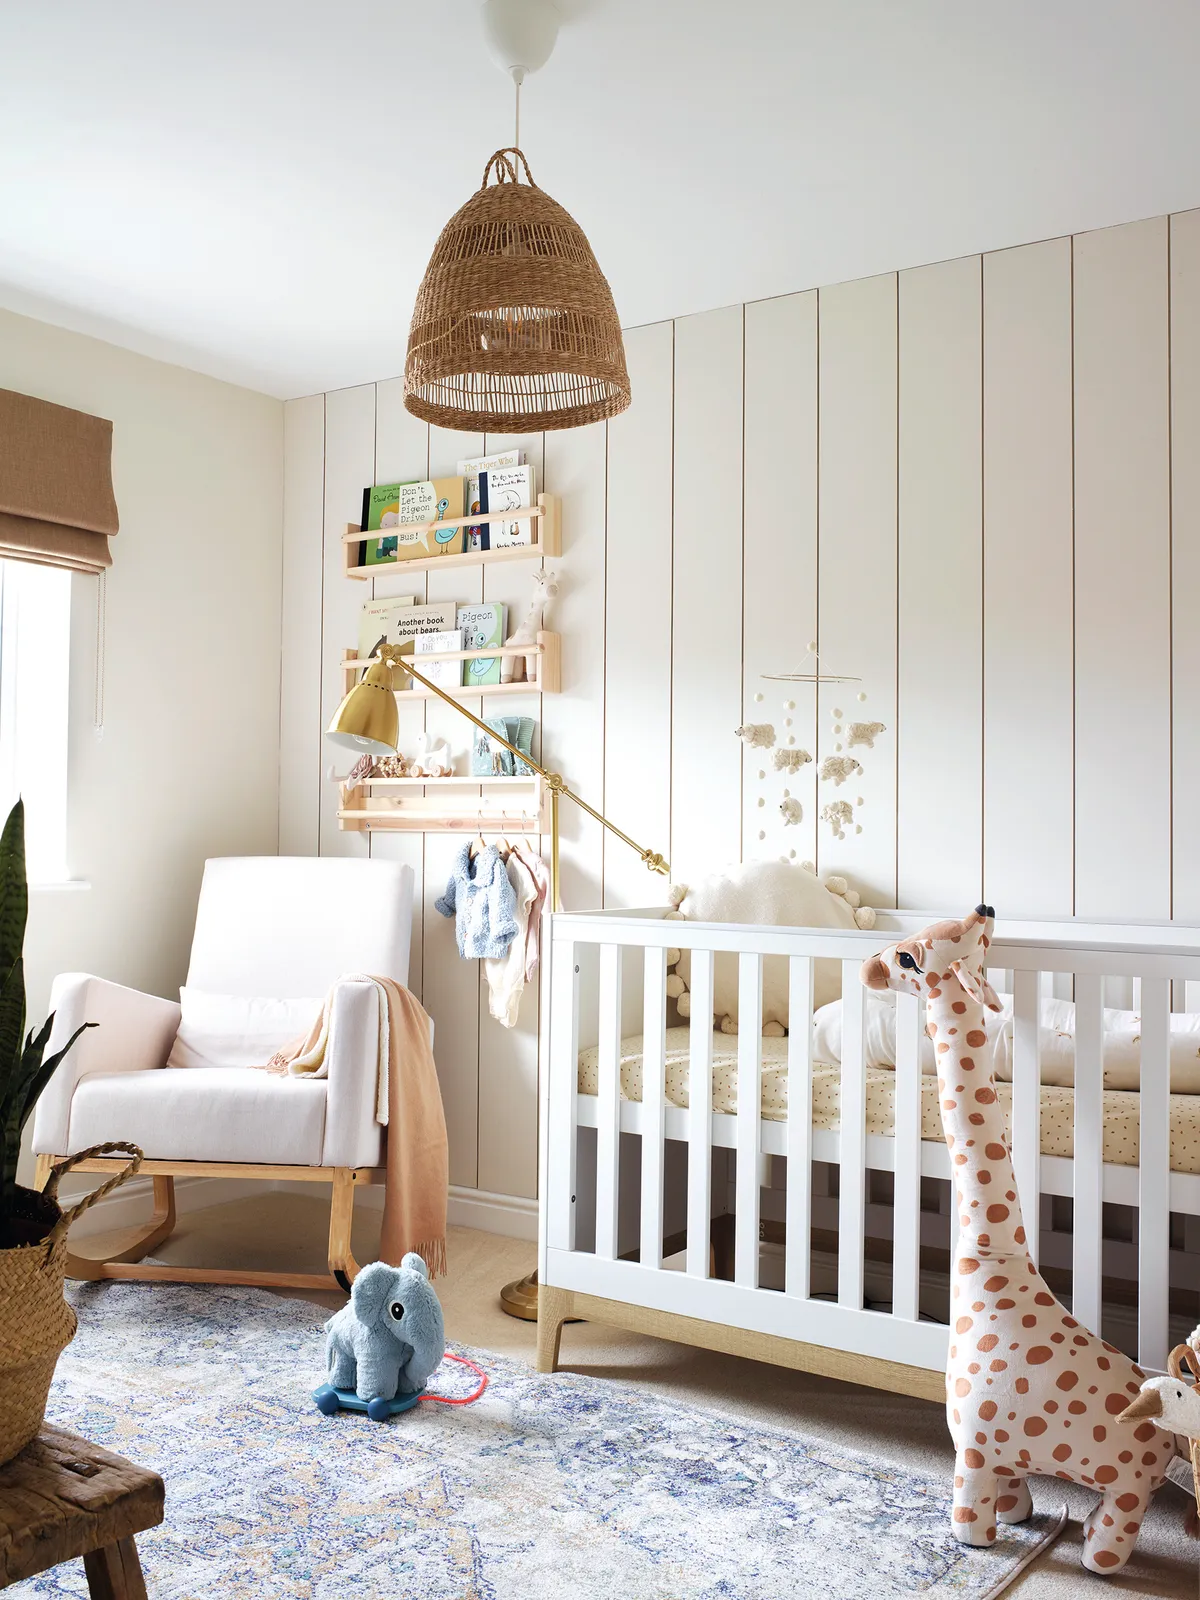 Bobby's nursery room has been decorated with a gender-neutral colour scheme and soothing natural materials